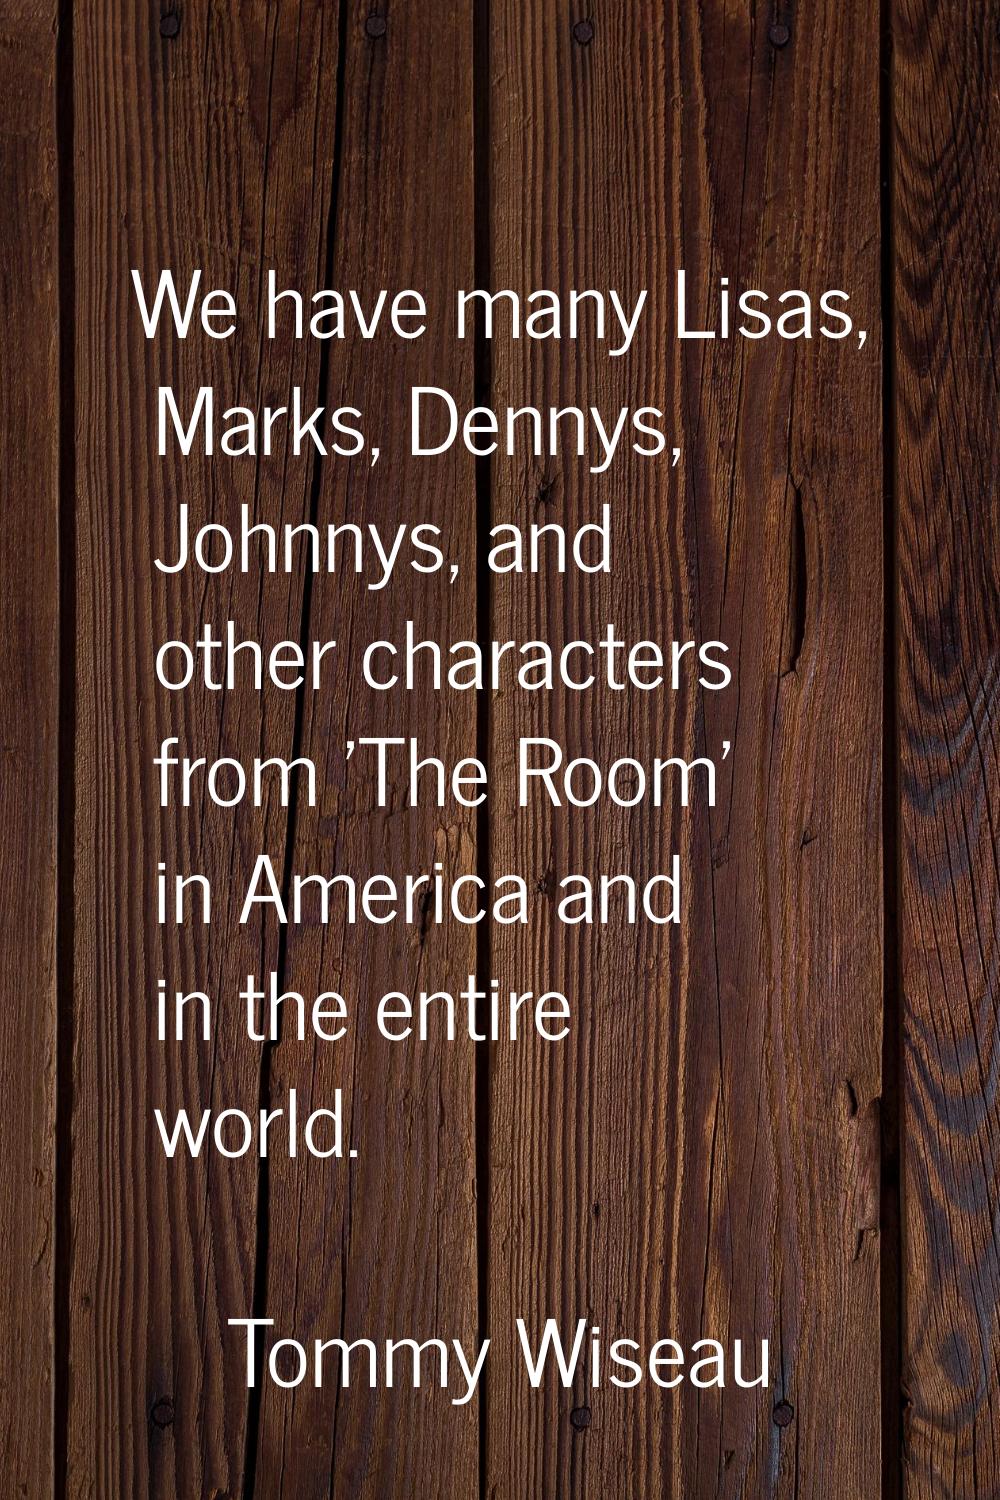 We have many Lisas, Marks, Dennys, Johnnys, and other characters from 'The Room' in America and in 